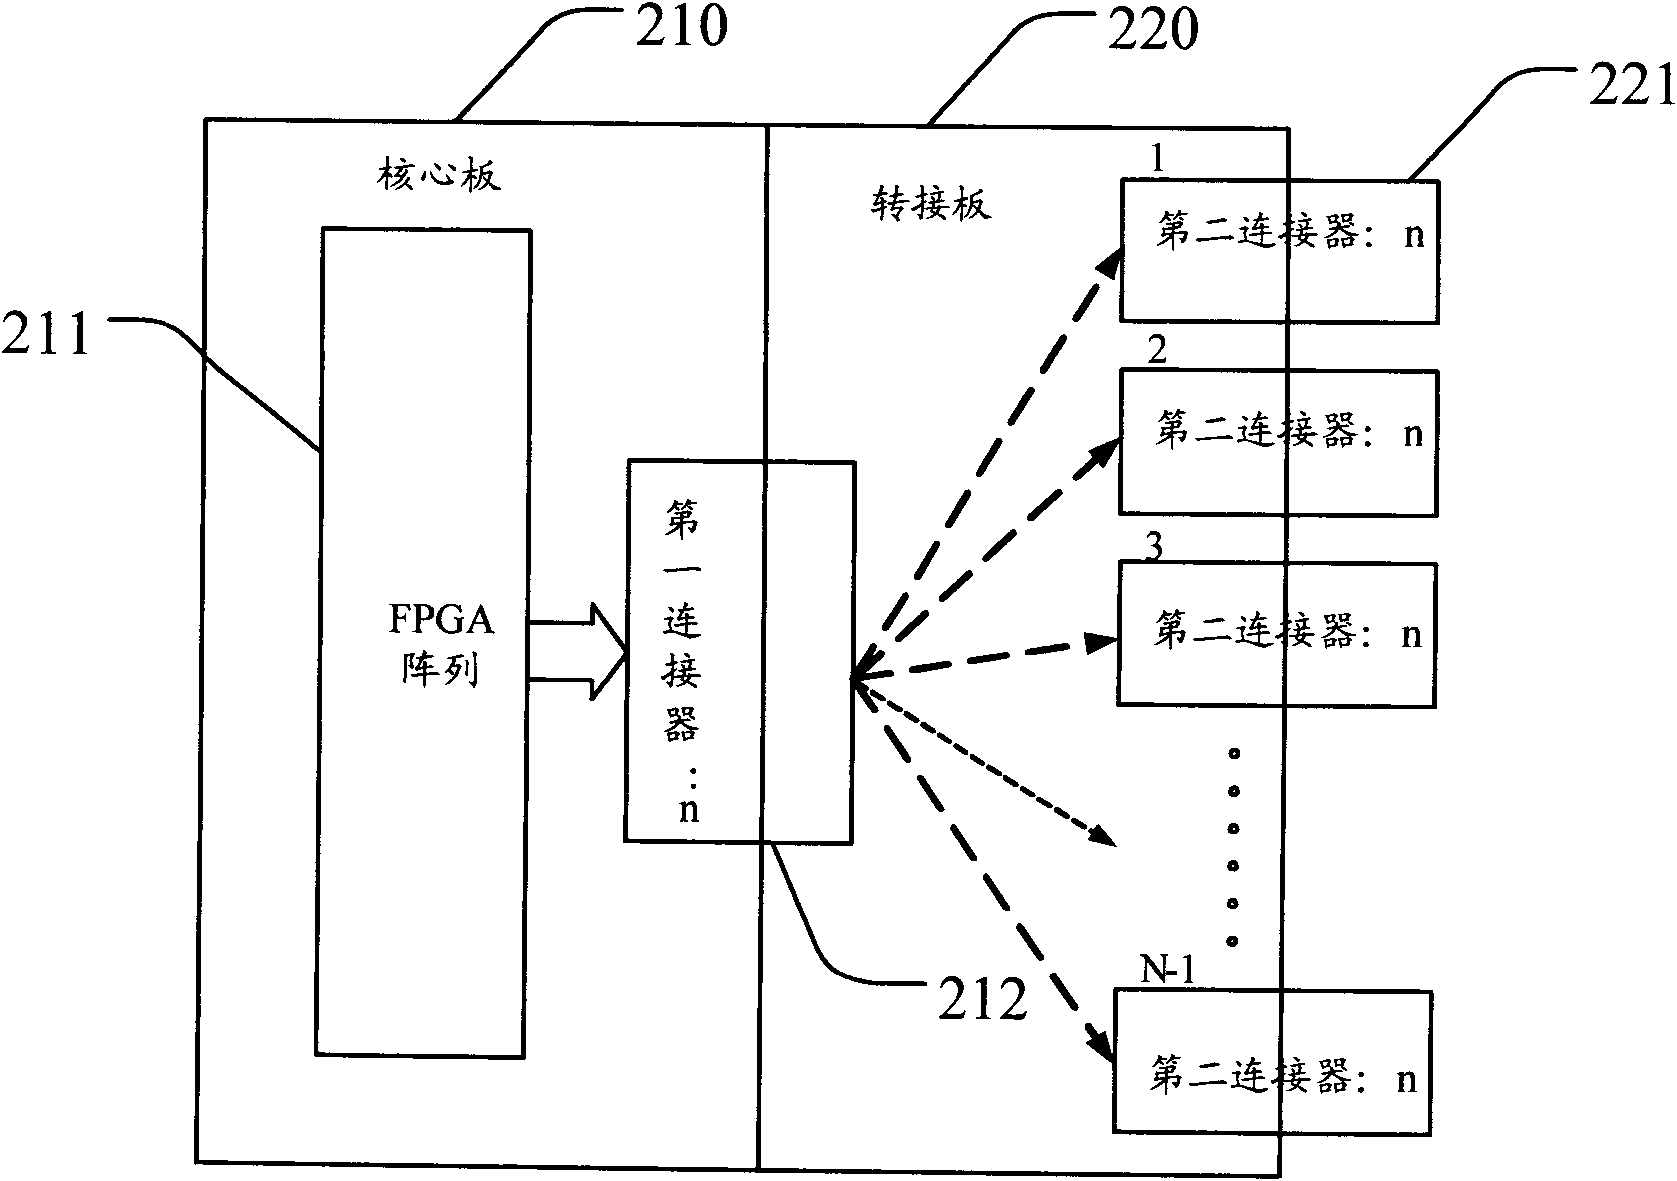 Prototype verification device for programmable logic devices